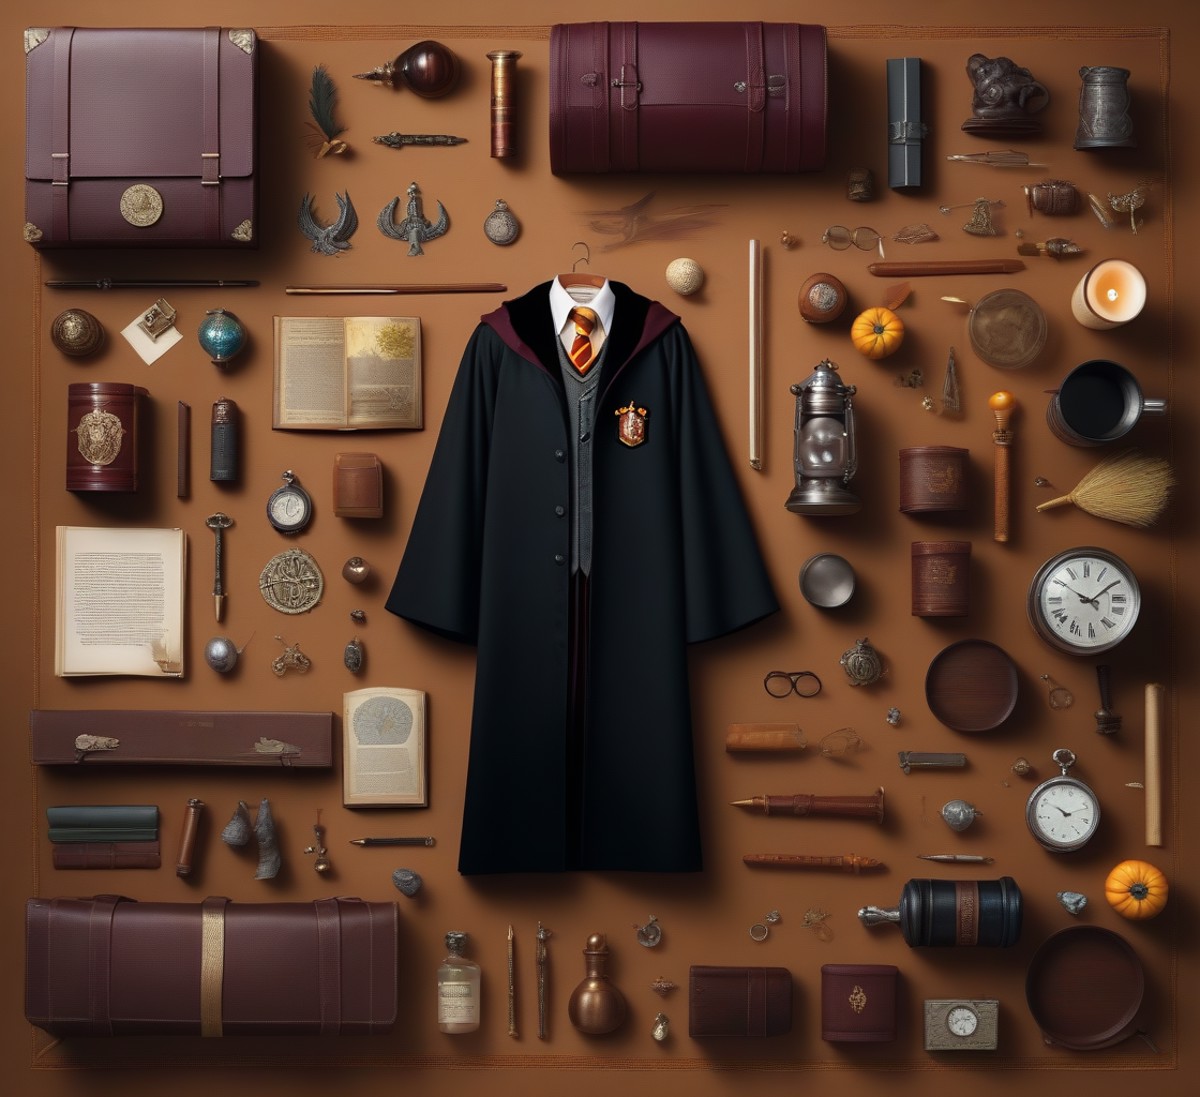 knolling, Things and Objects, Harry Potter., lots of details and additions, assembled character in the center of the image